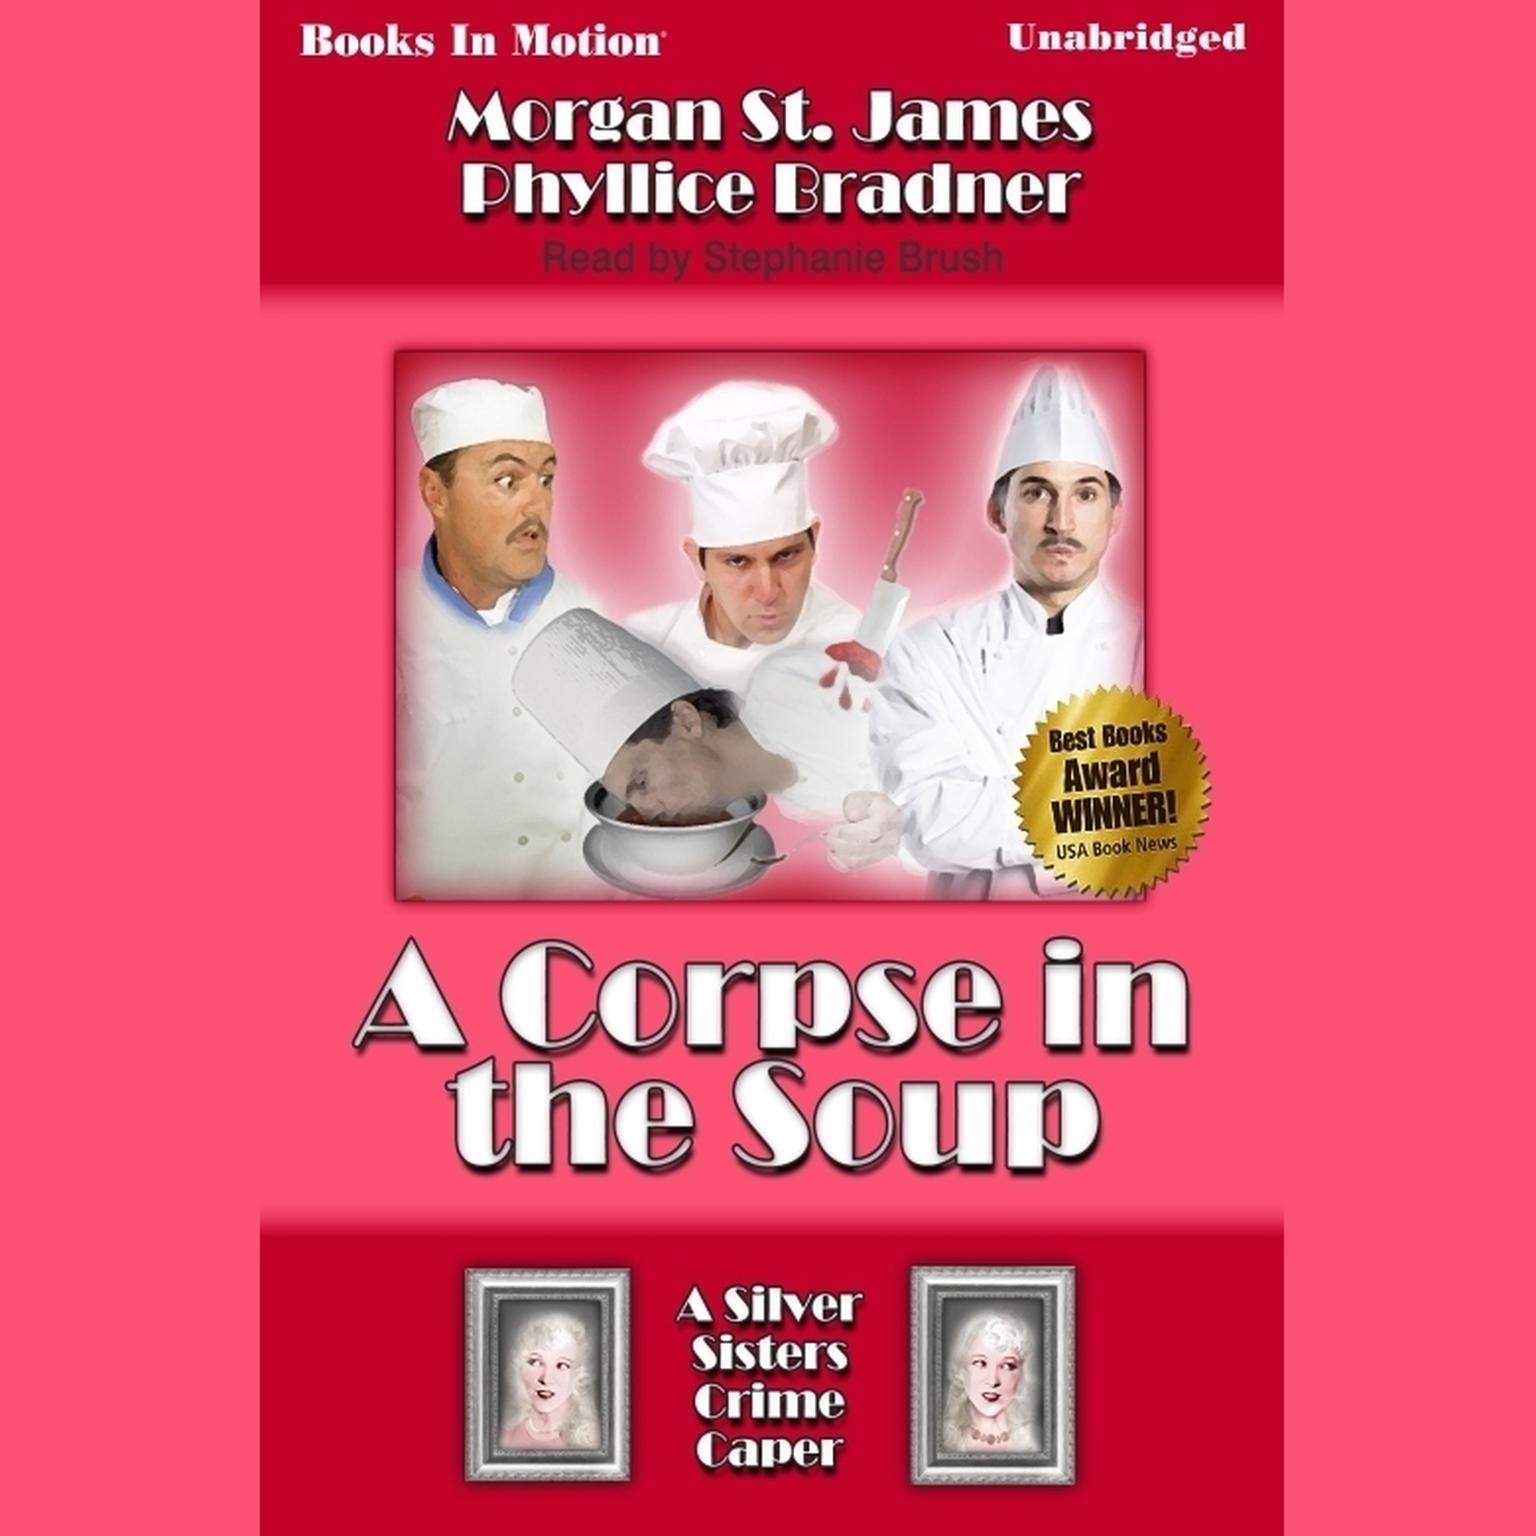 A Corpse in the Soup Audiobook, by Phyllice  Bradner